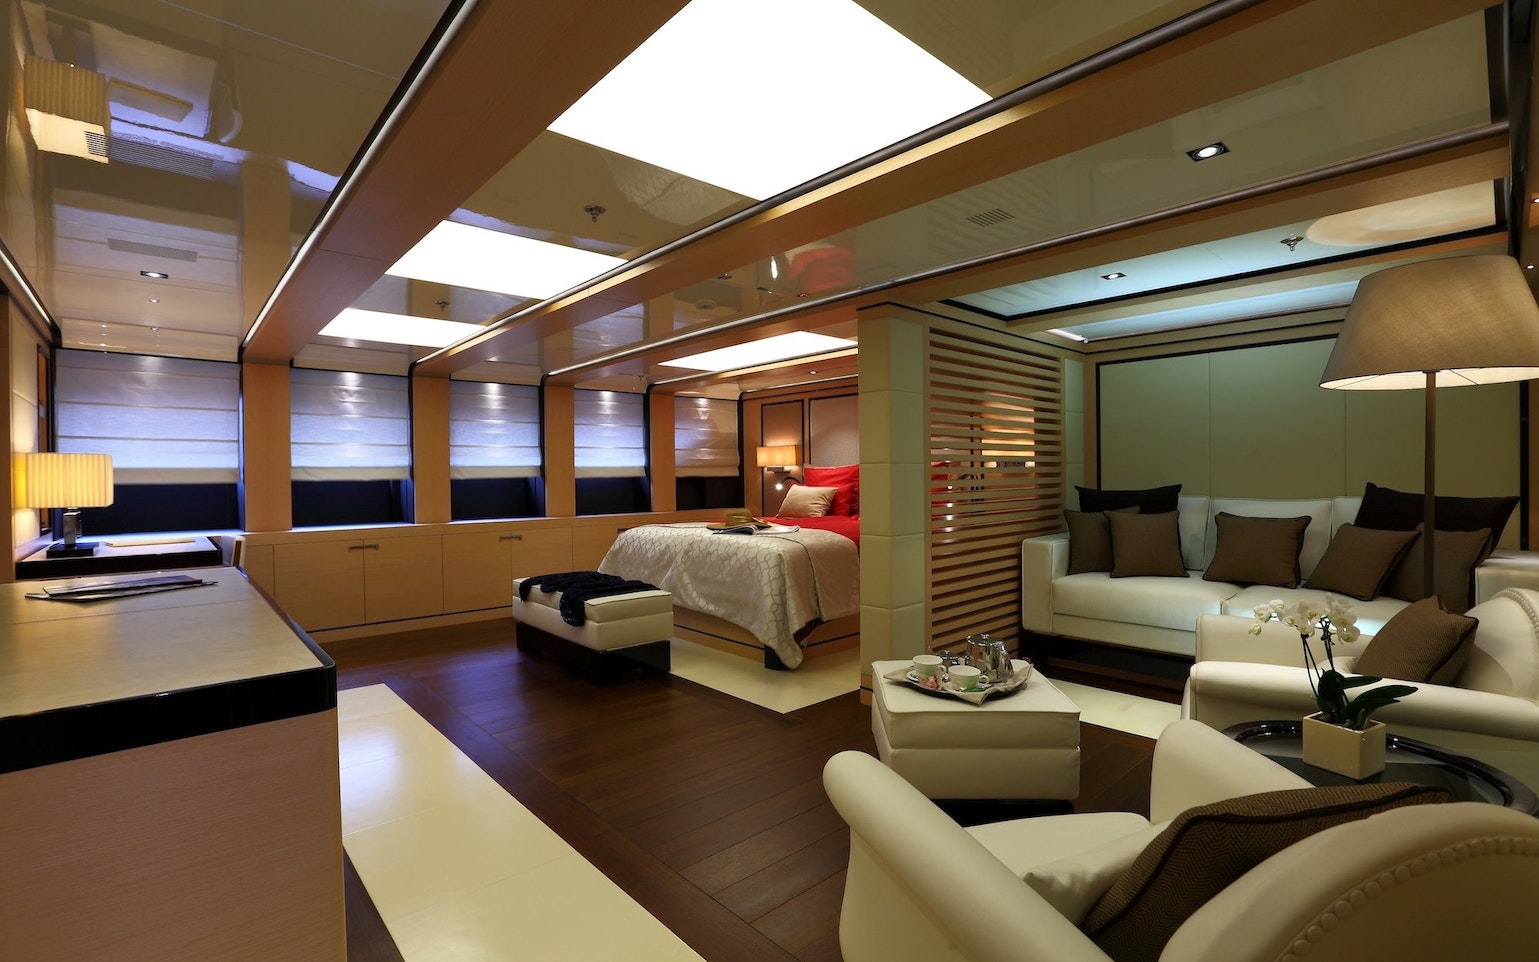 2 LADIES LUXURY YACHT CHARTER - TWO FULL WIDTH MASTER SUITES ON MAIN AND UPPER DECK